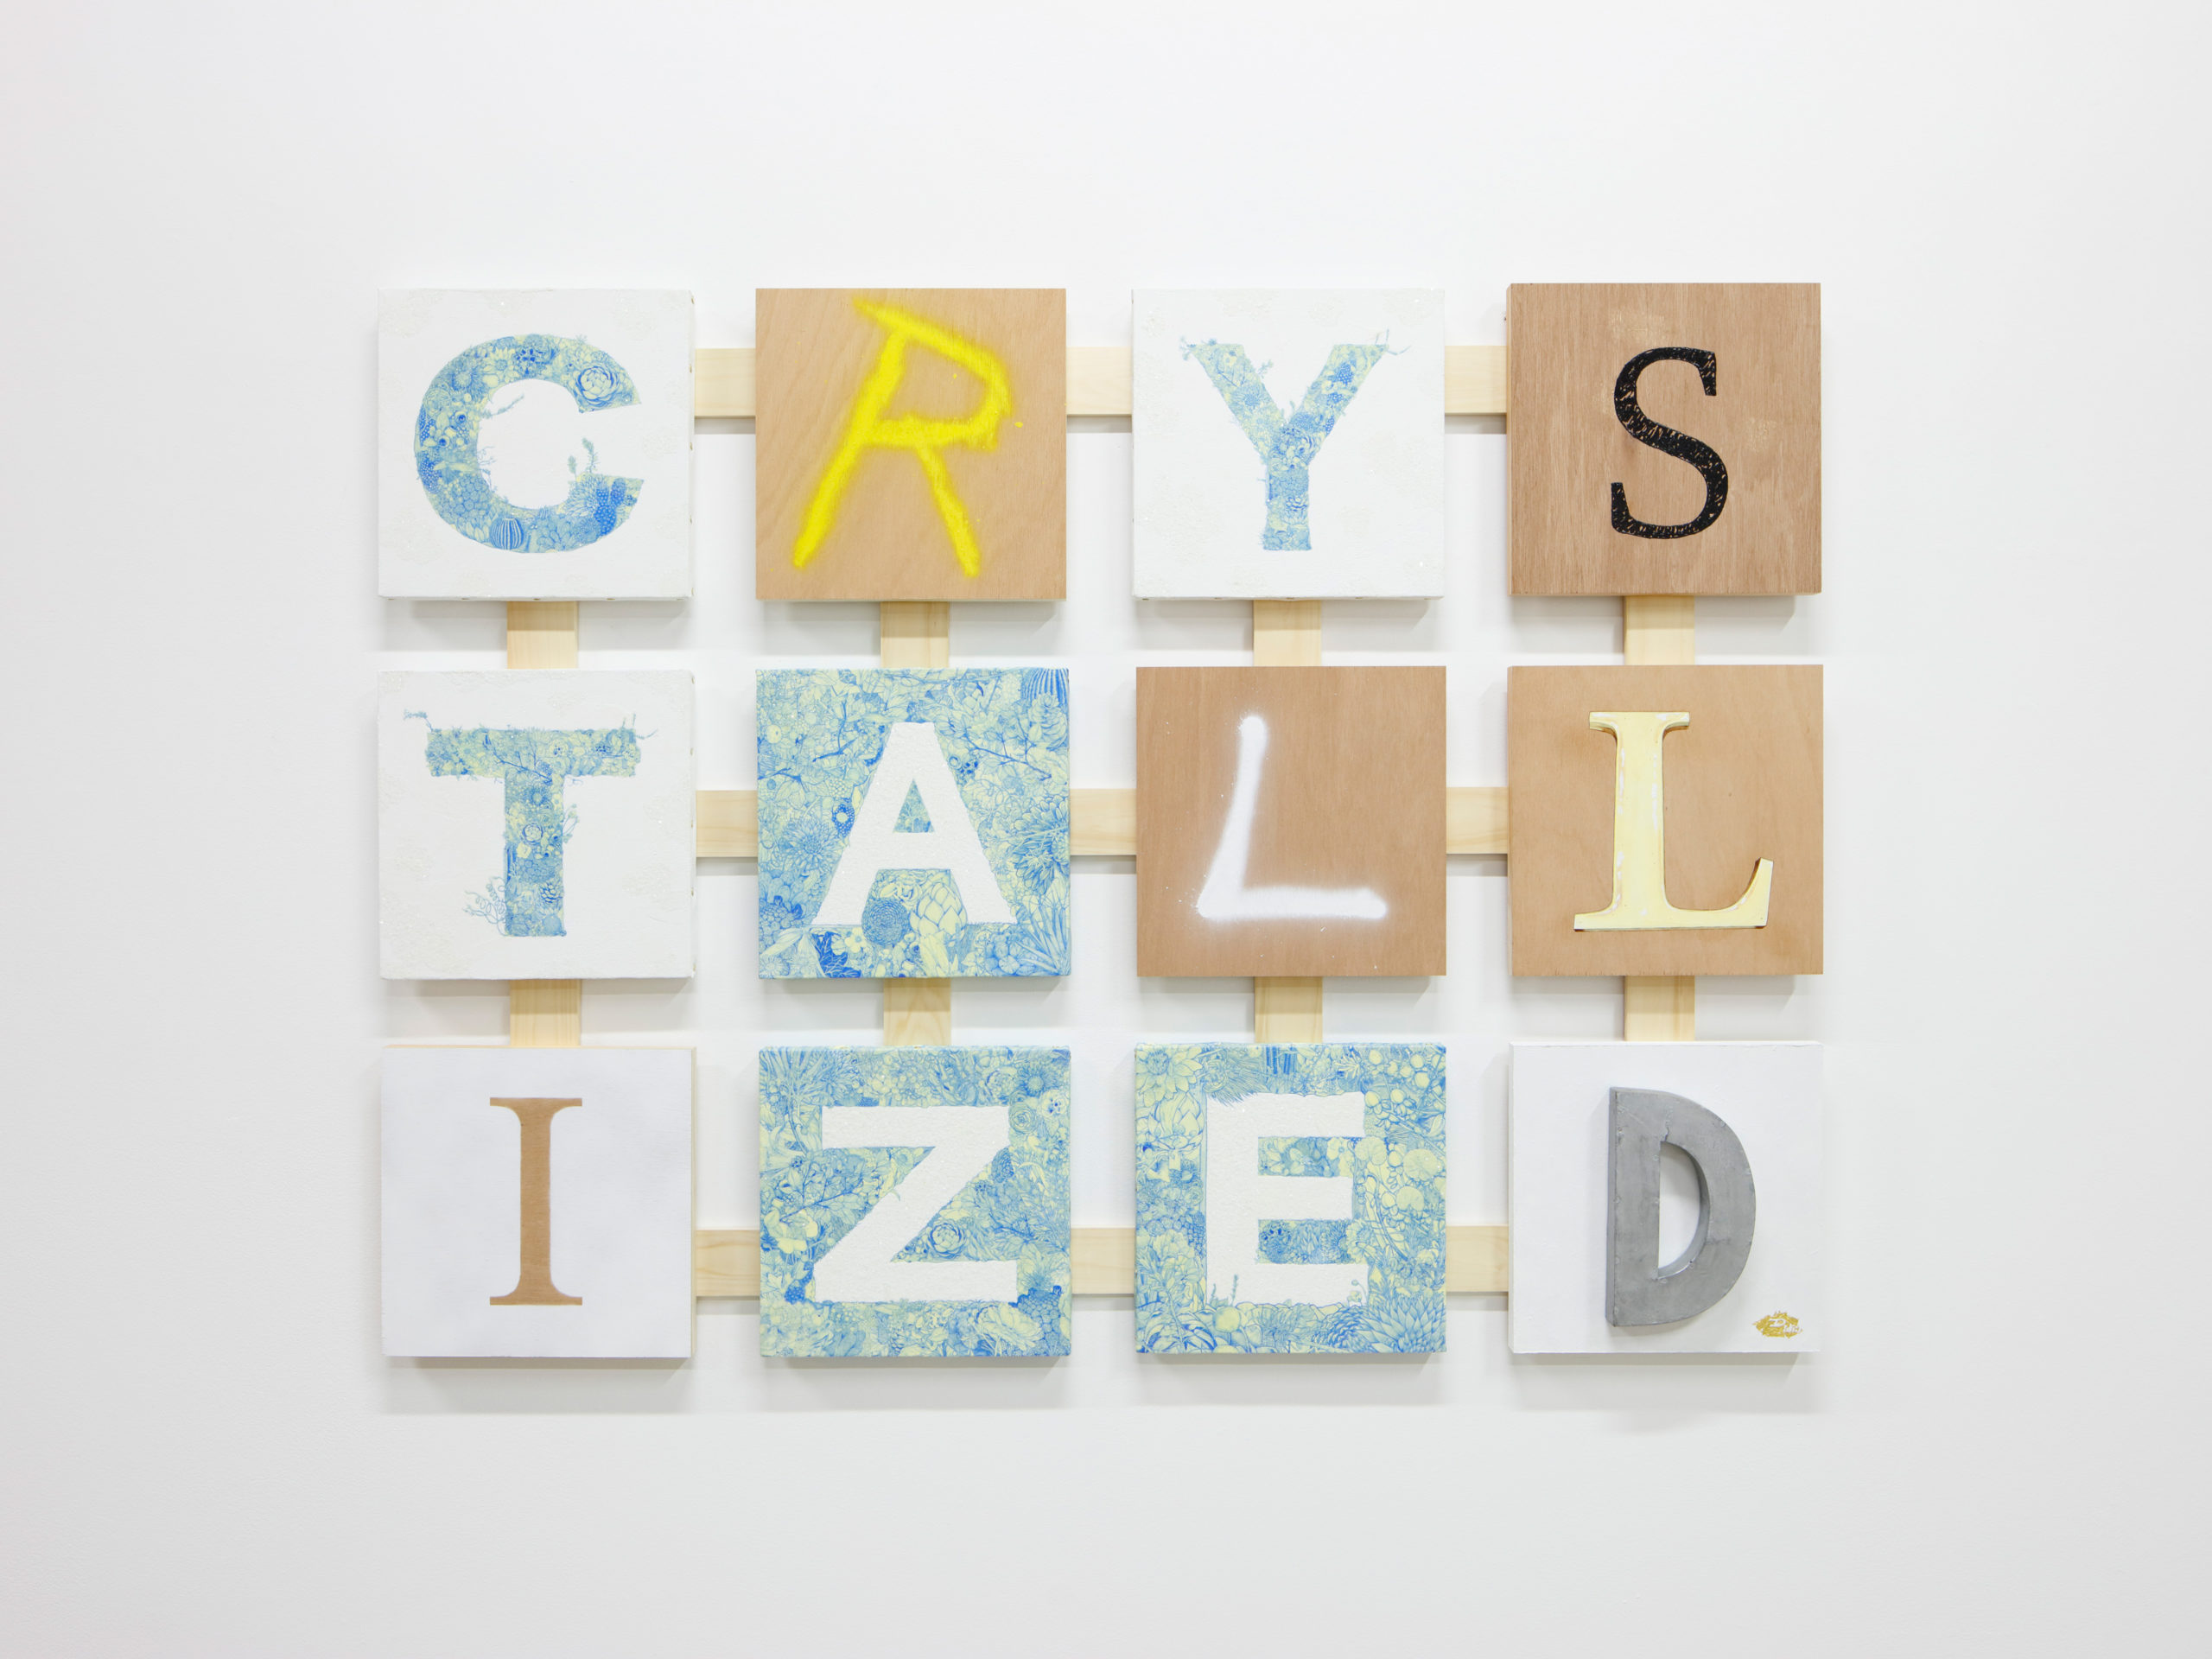 CRYSTALLIZED／ 1272✖️939mm／for solo show『Crystallized Points of View』at hpgrp gallery Tokyo Aoyama